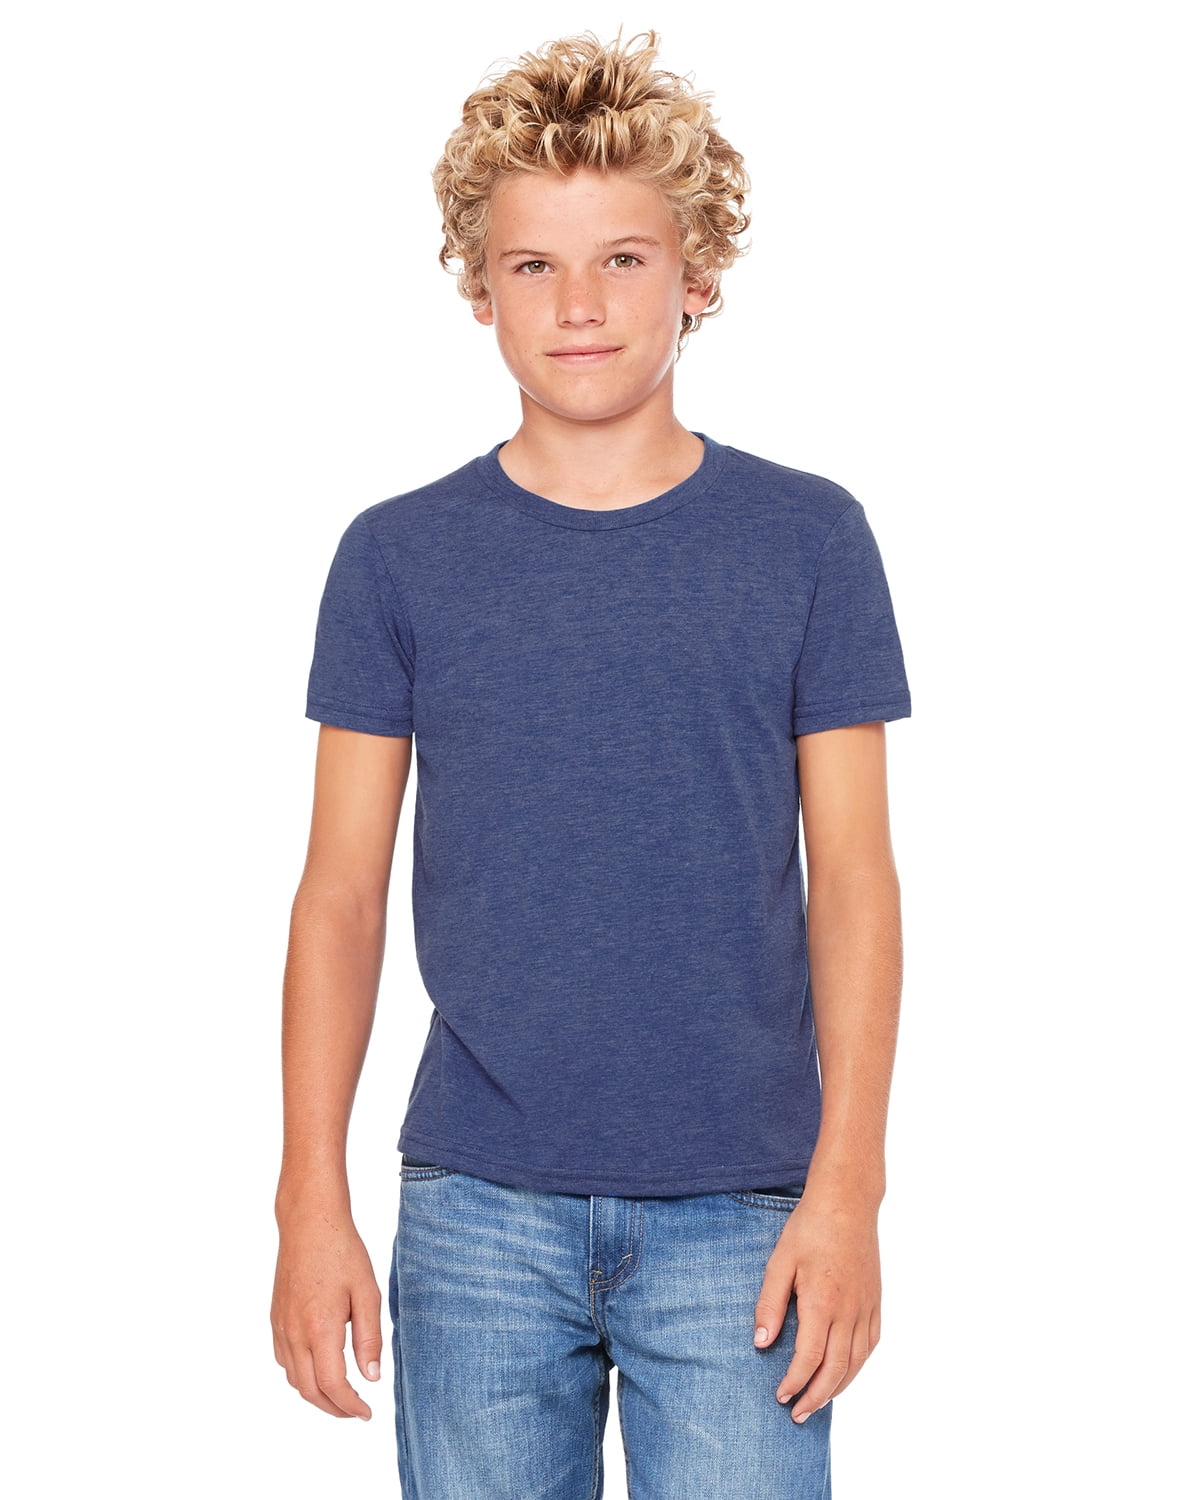 BELLA+CANVAS - The Bella + Canvas Youth Jersey Short-Sleeve T-Shirt ...